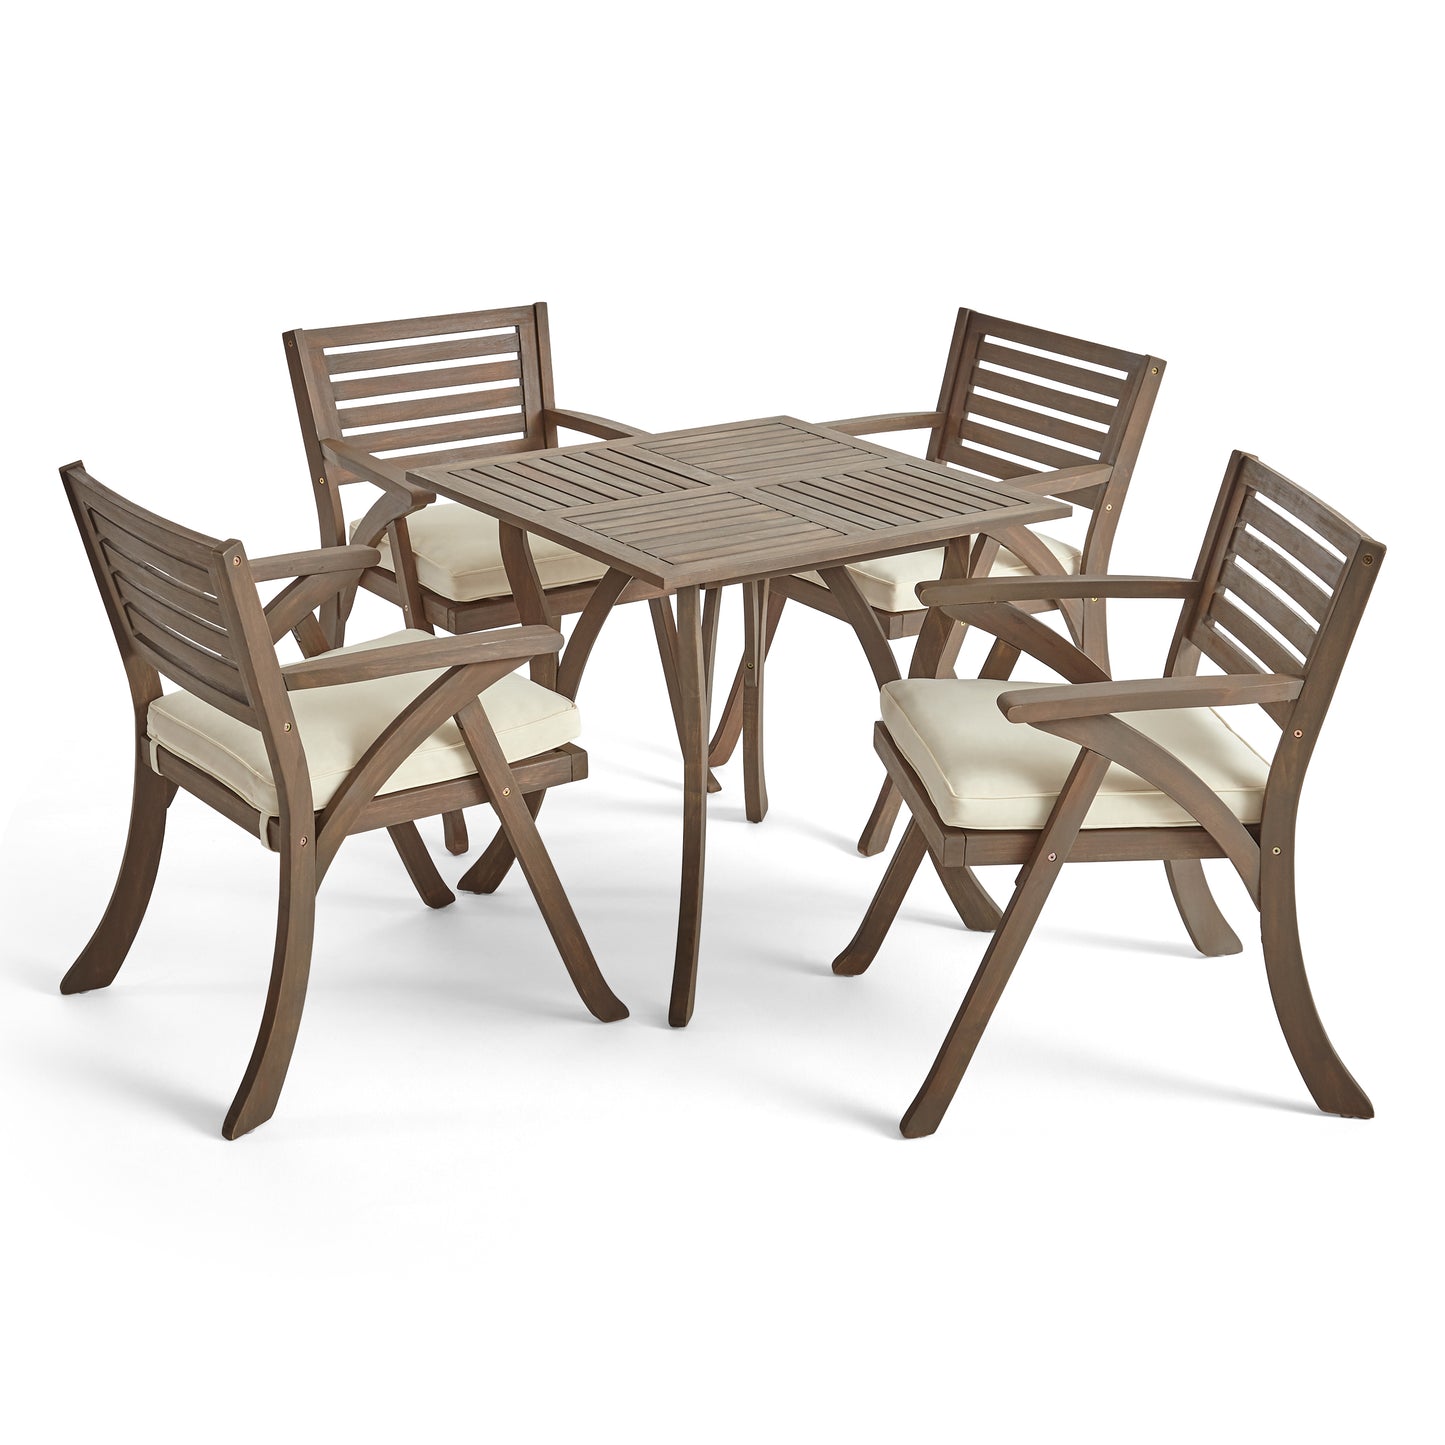 Hestia Outdoor 4-Seater Acacia Wood Dining Set with Square Table